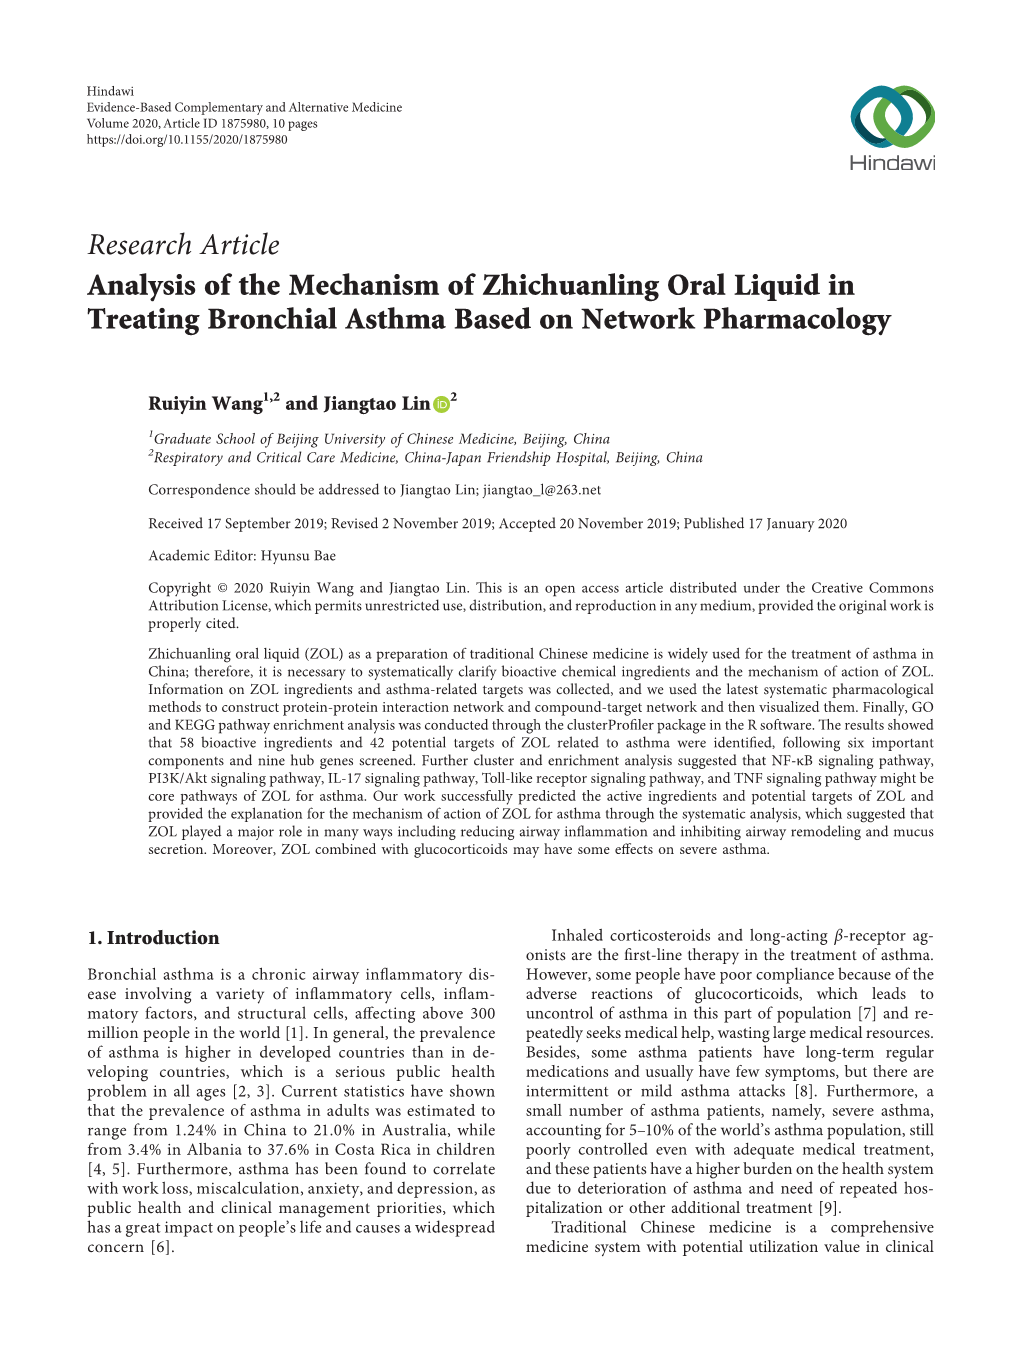 Analysis of the Mechanism of Zhichuanling Oral Liquid in Treating Bronchial Asthma Based on Network Pharmacology